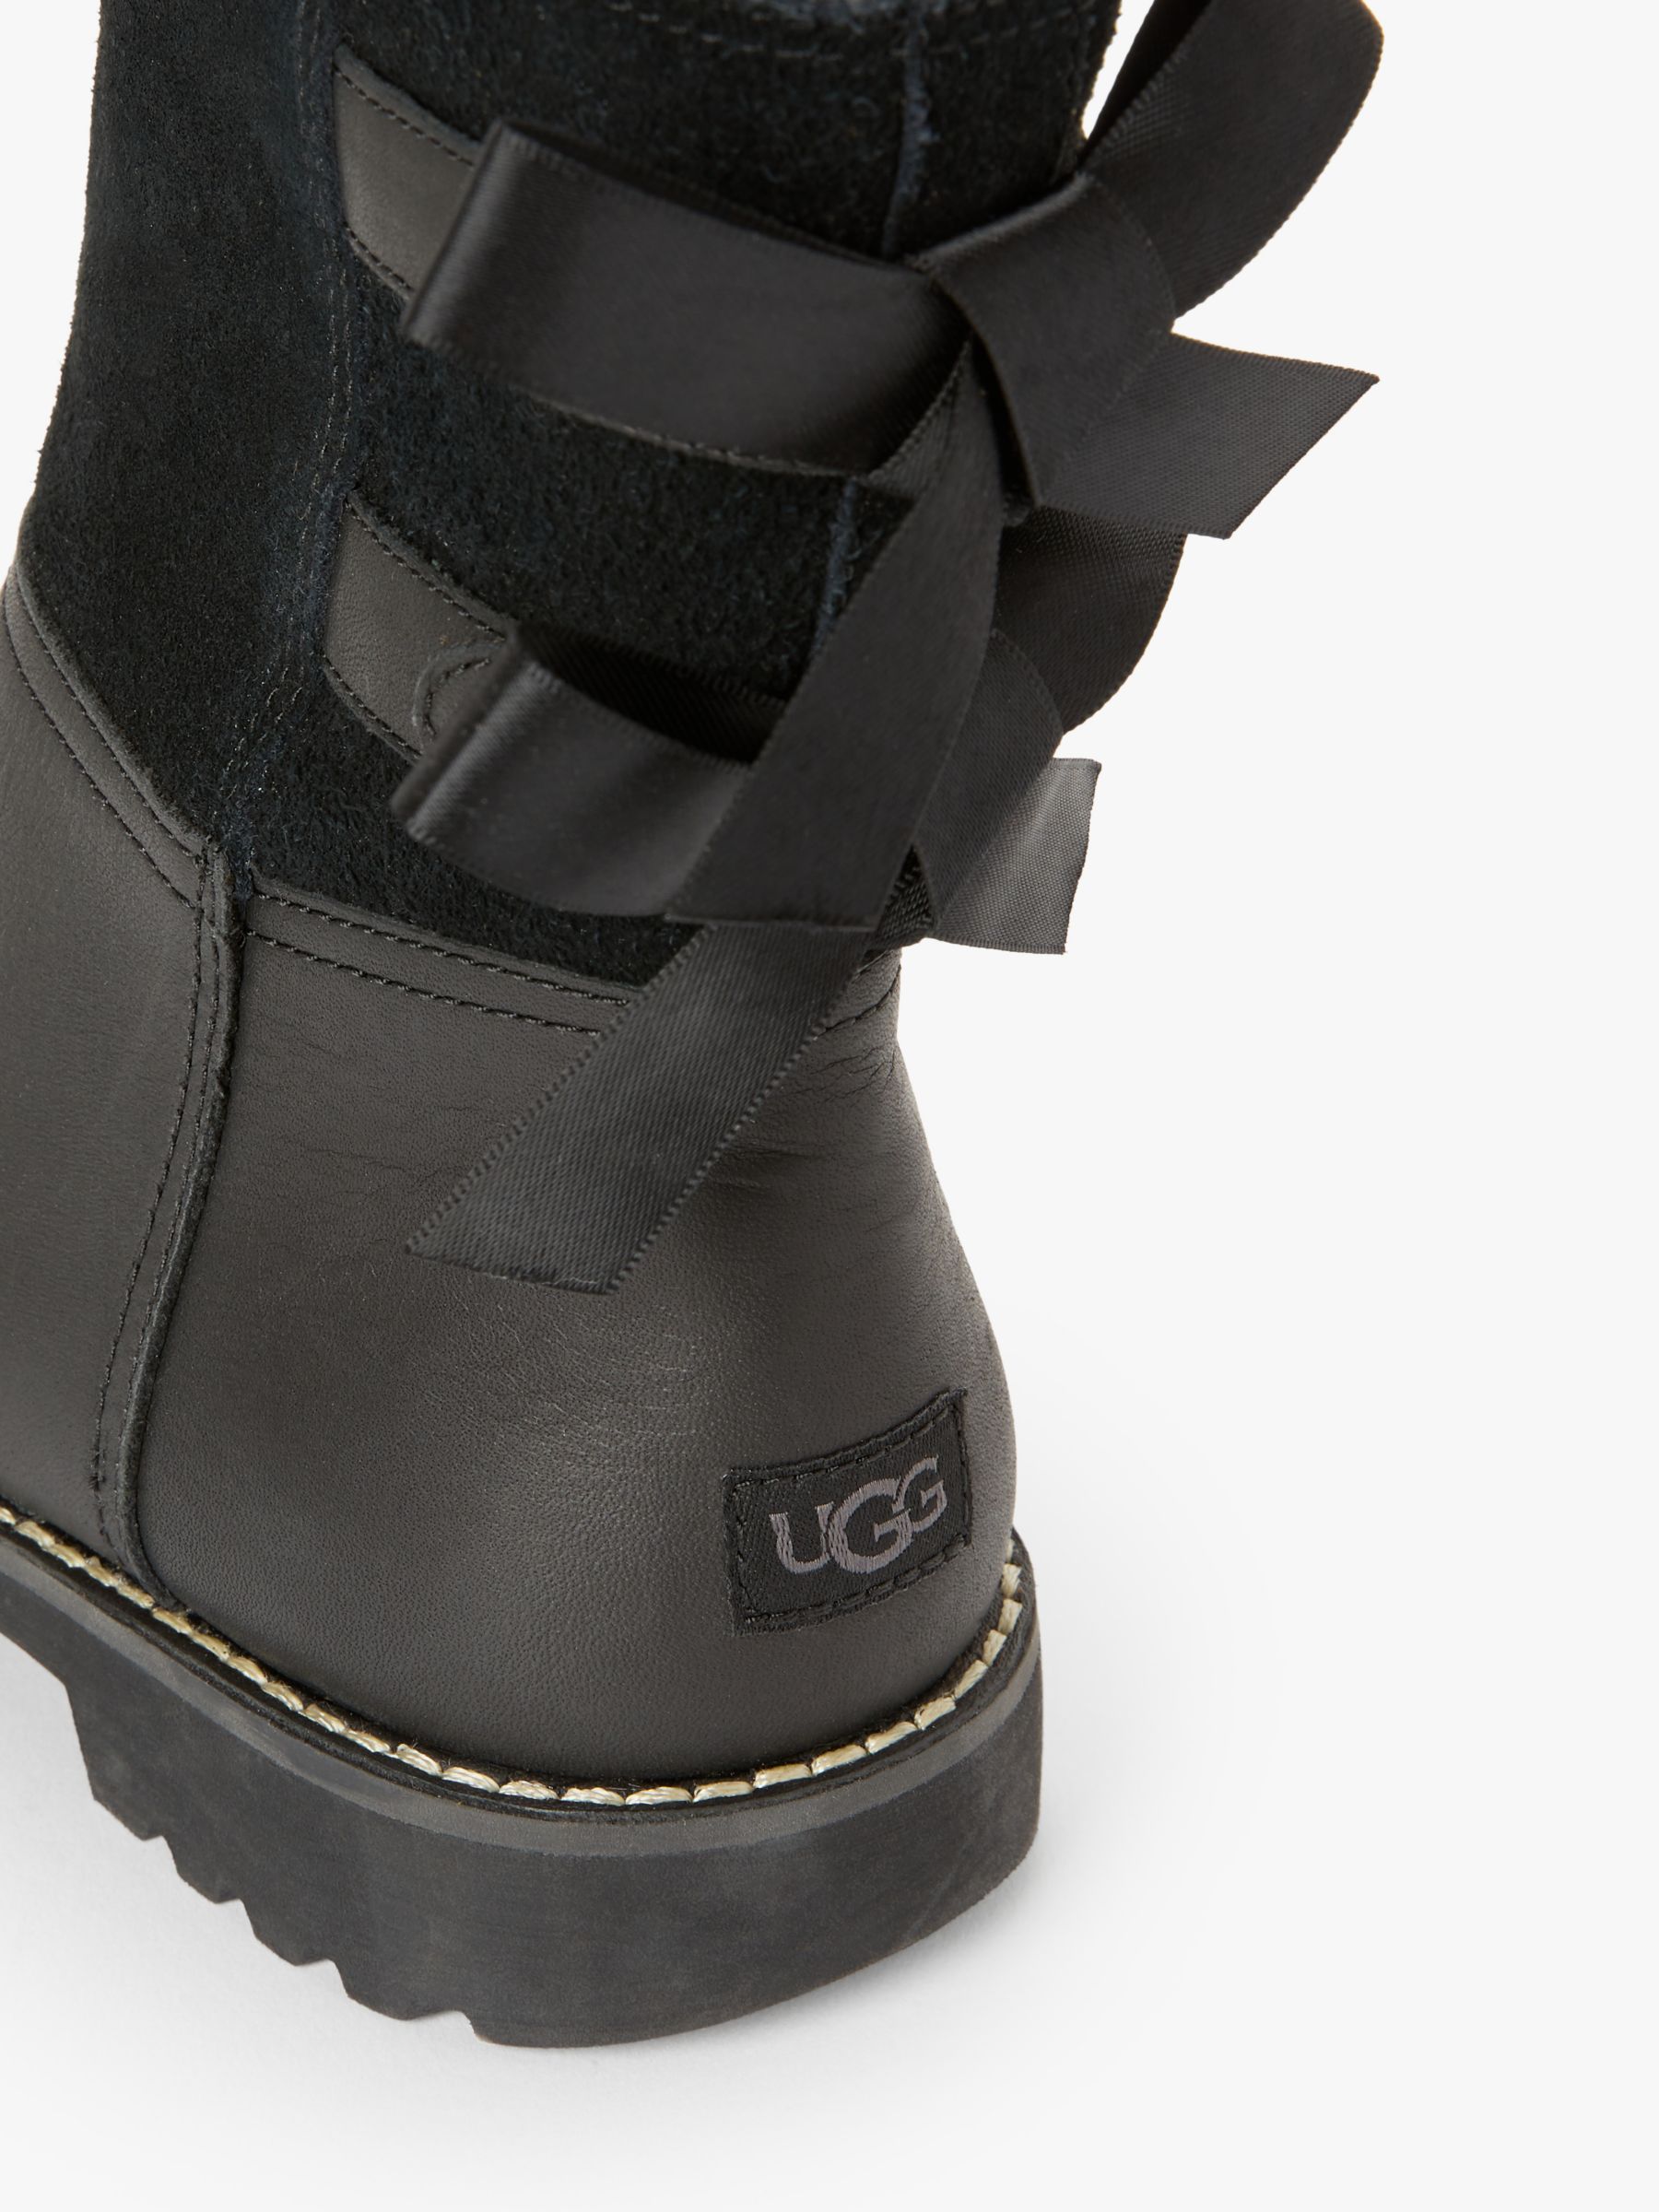 black leather ugg boots